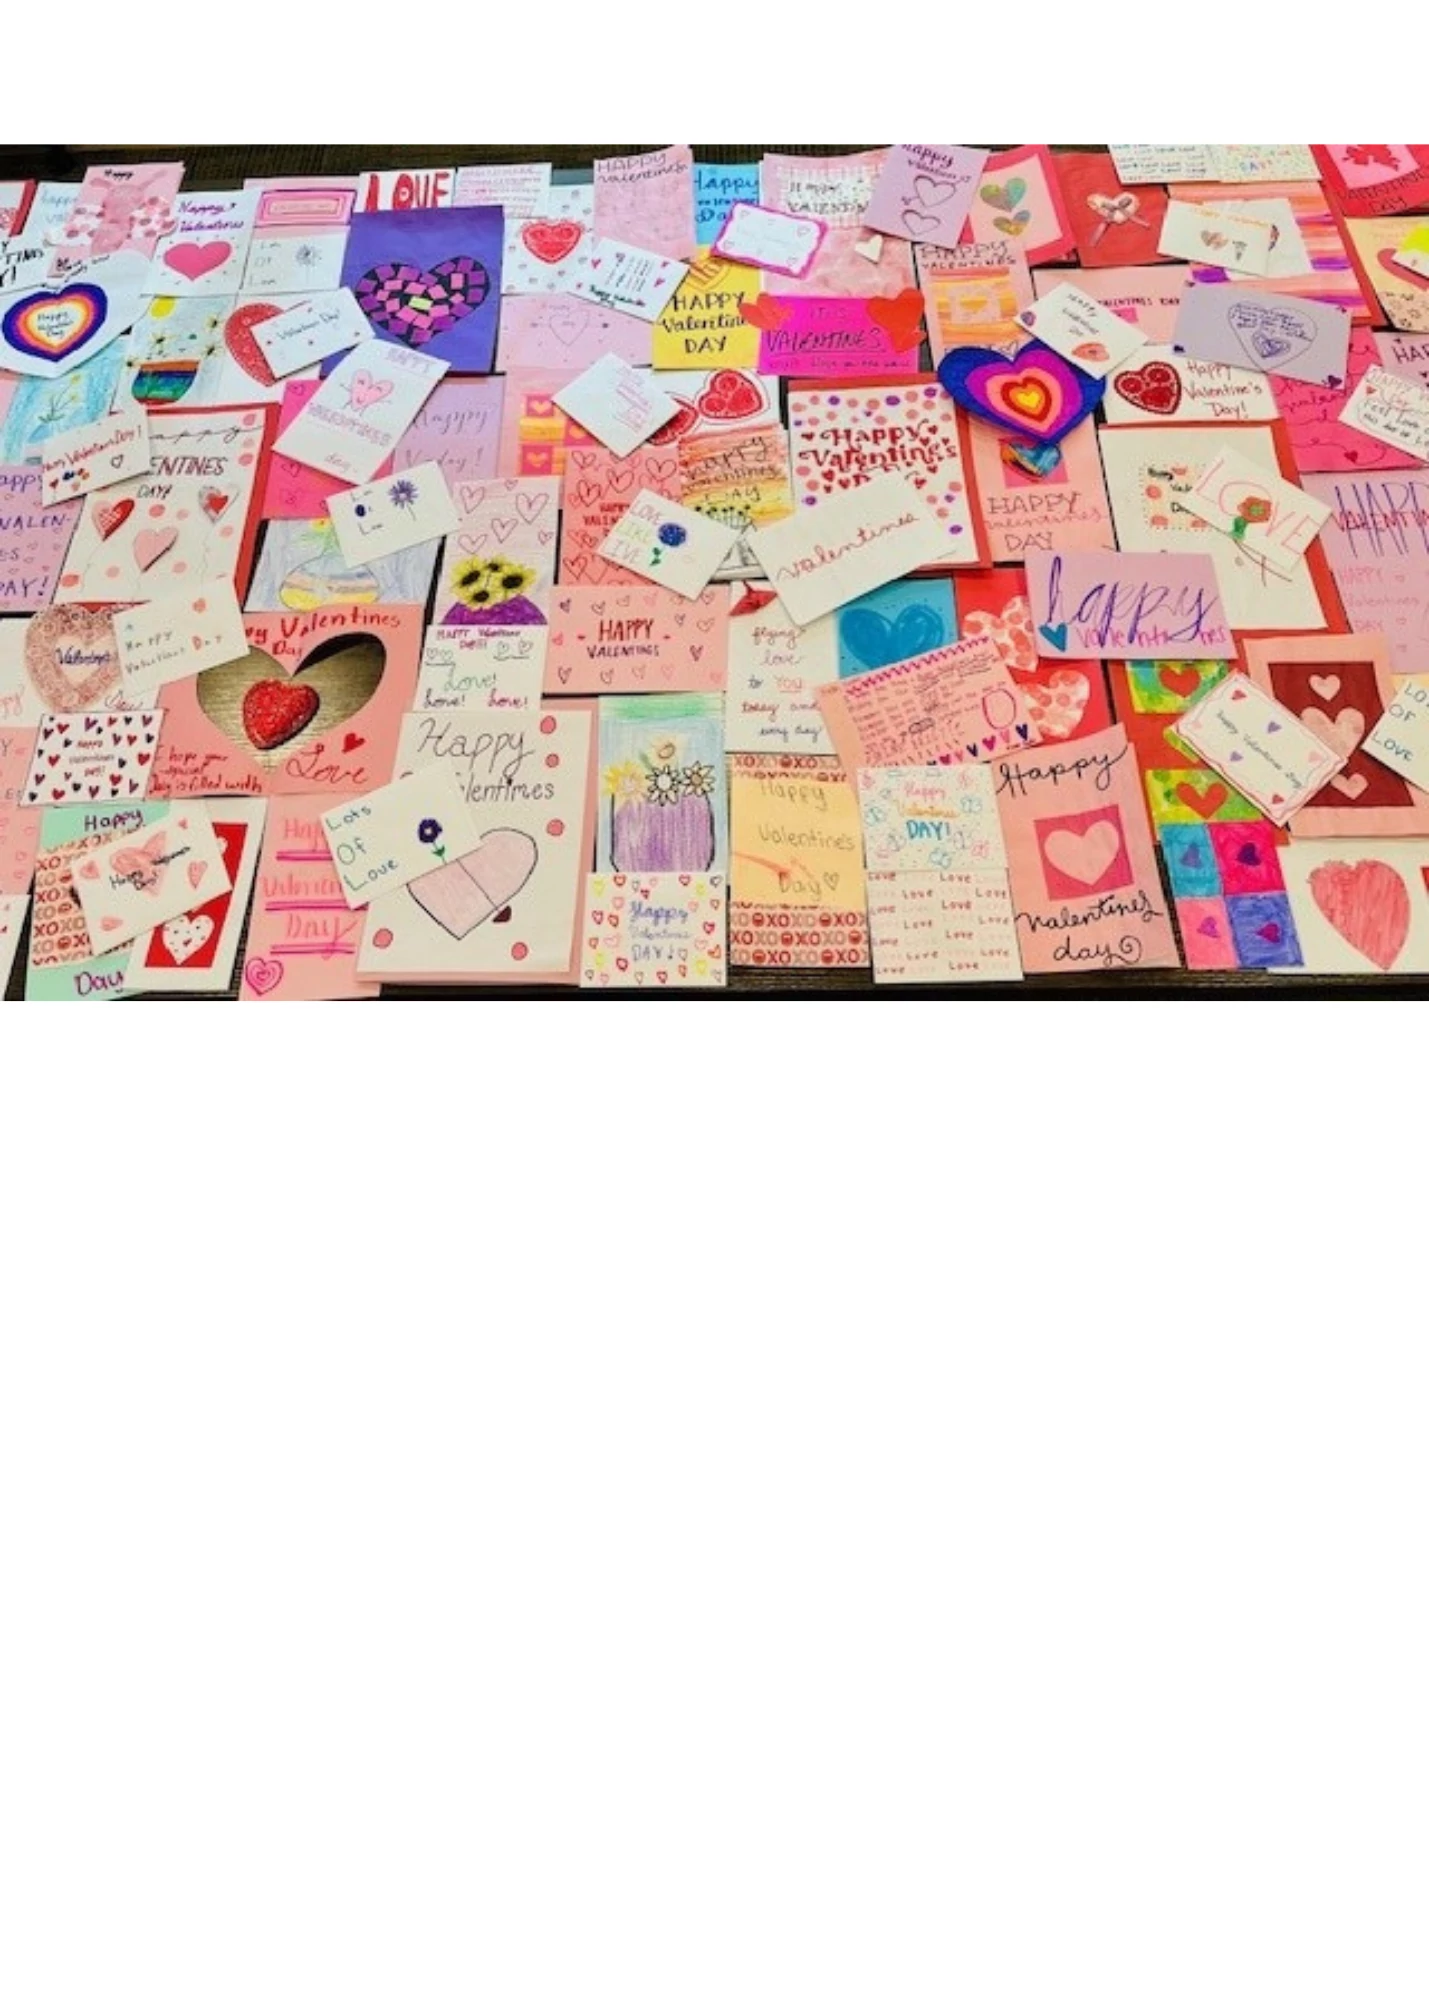 The Dear Senior, Valentine’s Day Card drive was a resounding success!  Thanks to the kindness and creativity of students from local schools and youth ministries who created over 1000 Valentine’s Day cards which were distributed to seniors by St. Luke’s Meals on Wheels Oklahoma City and the Oklahoma County Senior Nutrition Program.  Special shout out to Crossings Christian School, Christ the King Catholic School, St. Elizabeth Ann Seton Catholic School, Good Shepherd Lutheran School of MWC, The Catholic School of St. Eugene’s, Casady School, and Westminster Presbyterian Church Youth Ministries.  Thank you for all you do! 💌💗